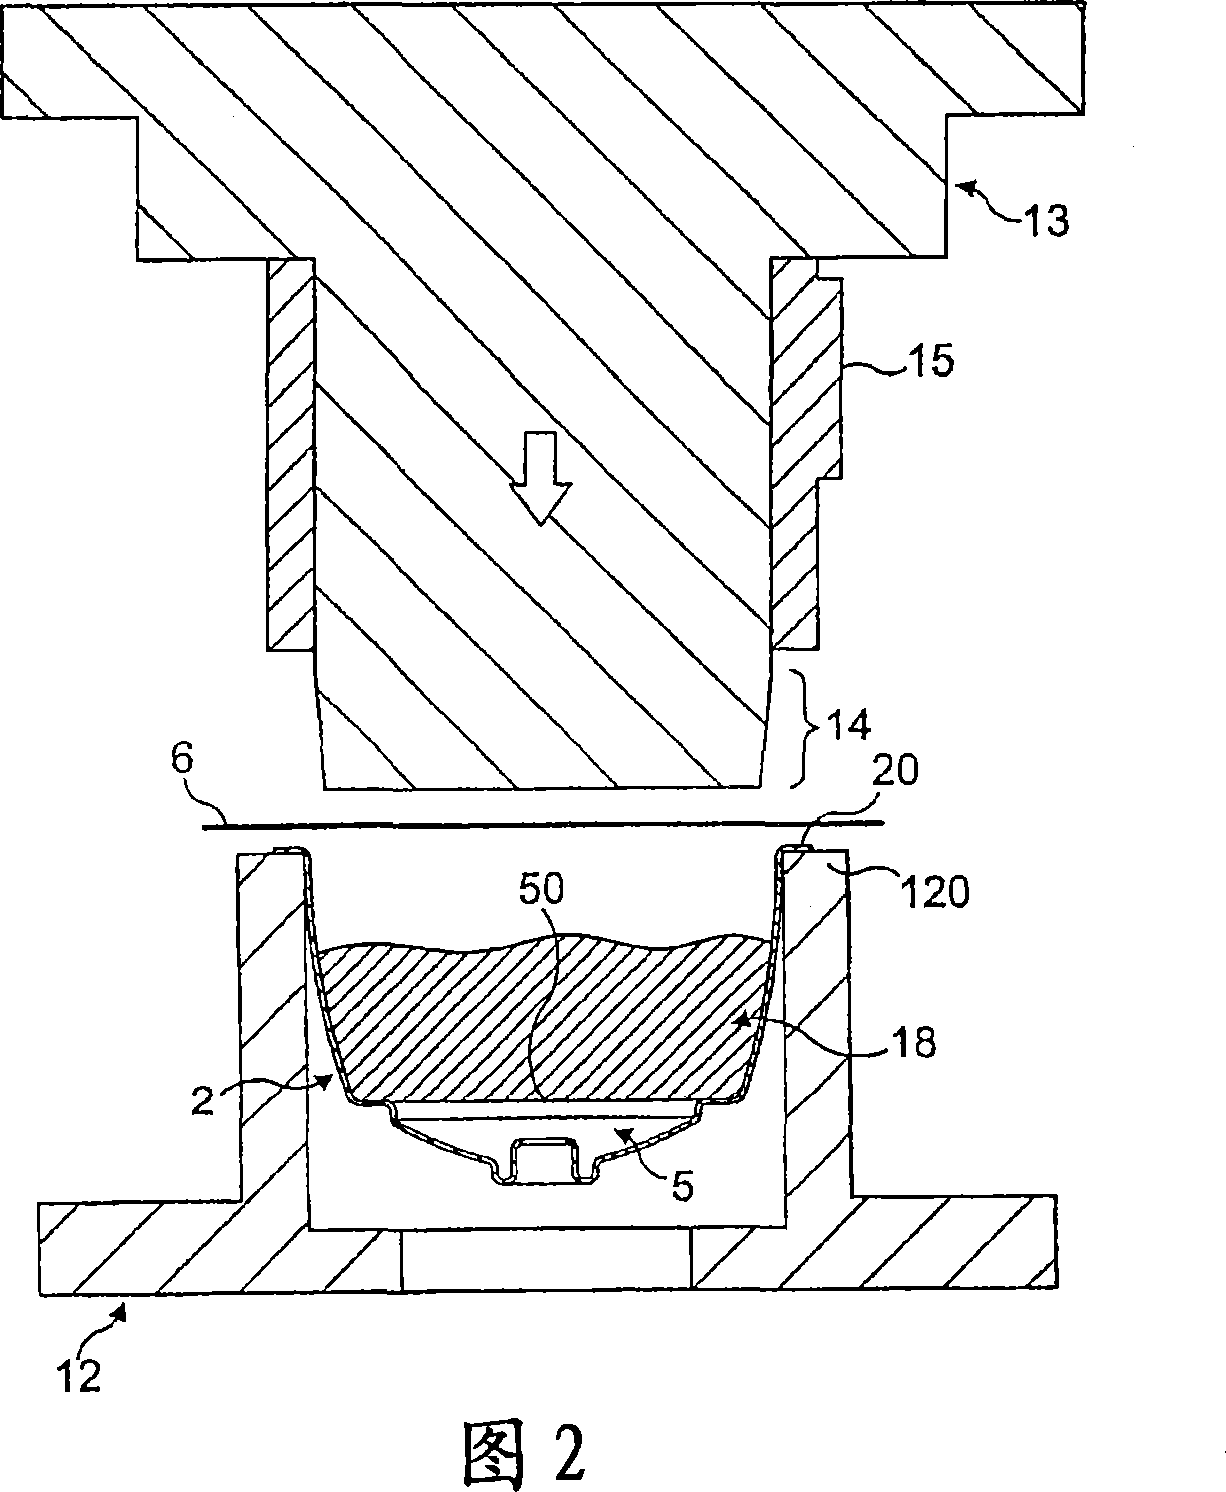 Capsule for preparing and delivering a drink by injecting a pressurized fluid into the capsule